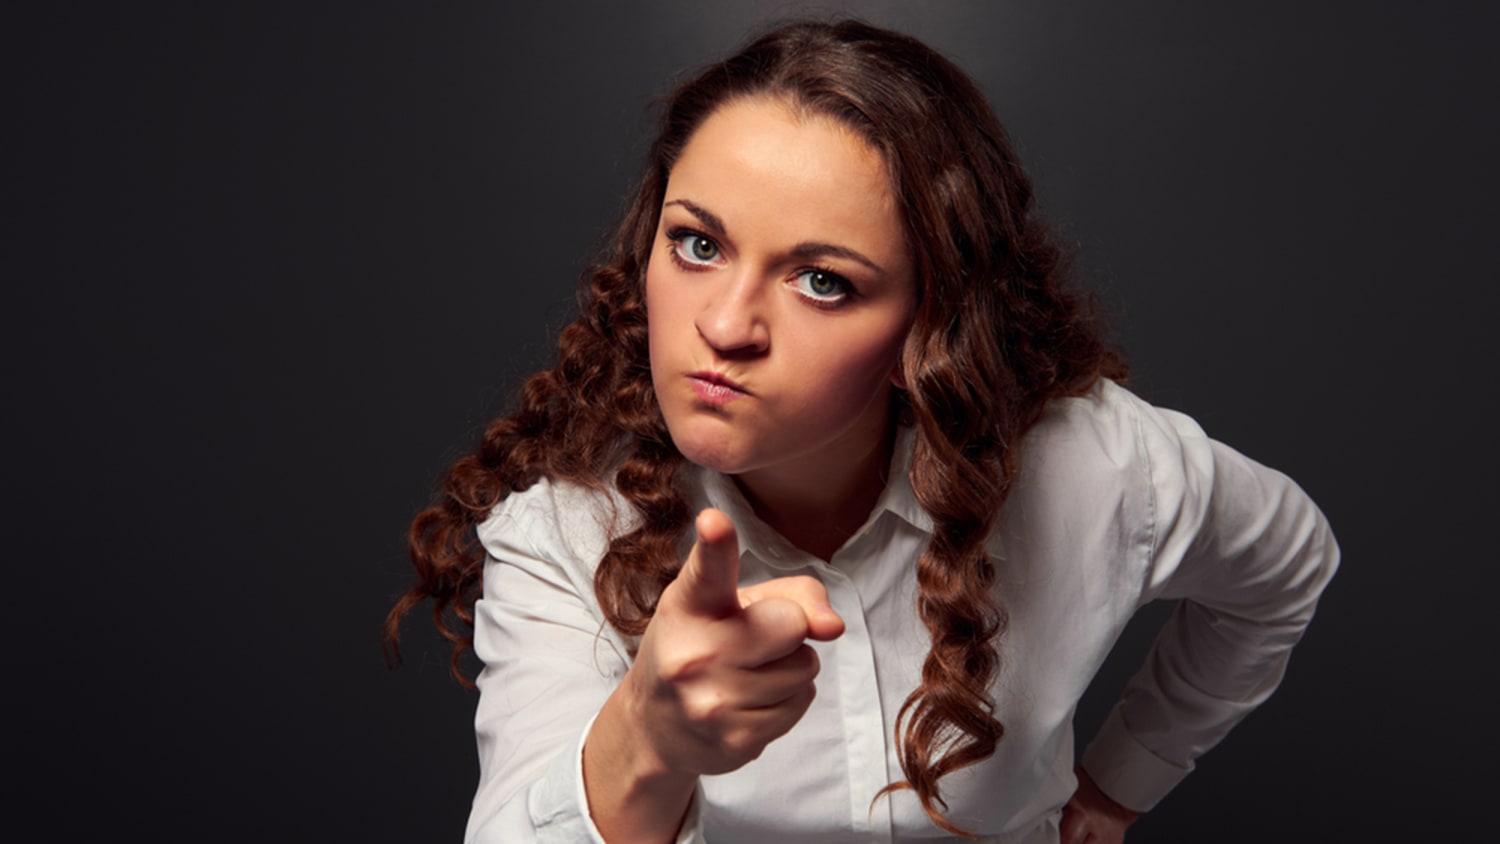 How to not be called an 'angry woman': 7 ways to speak up